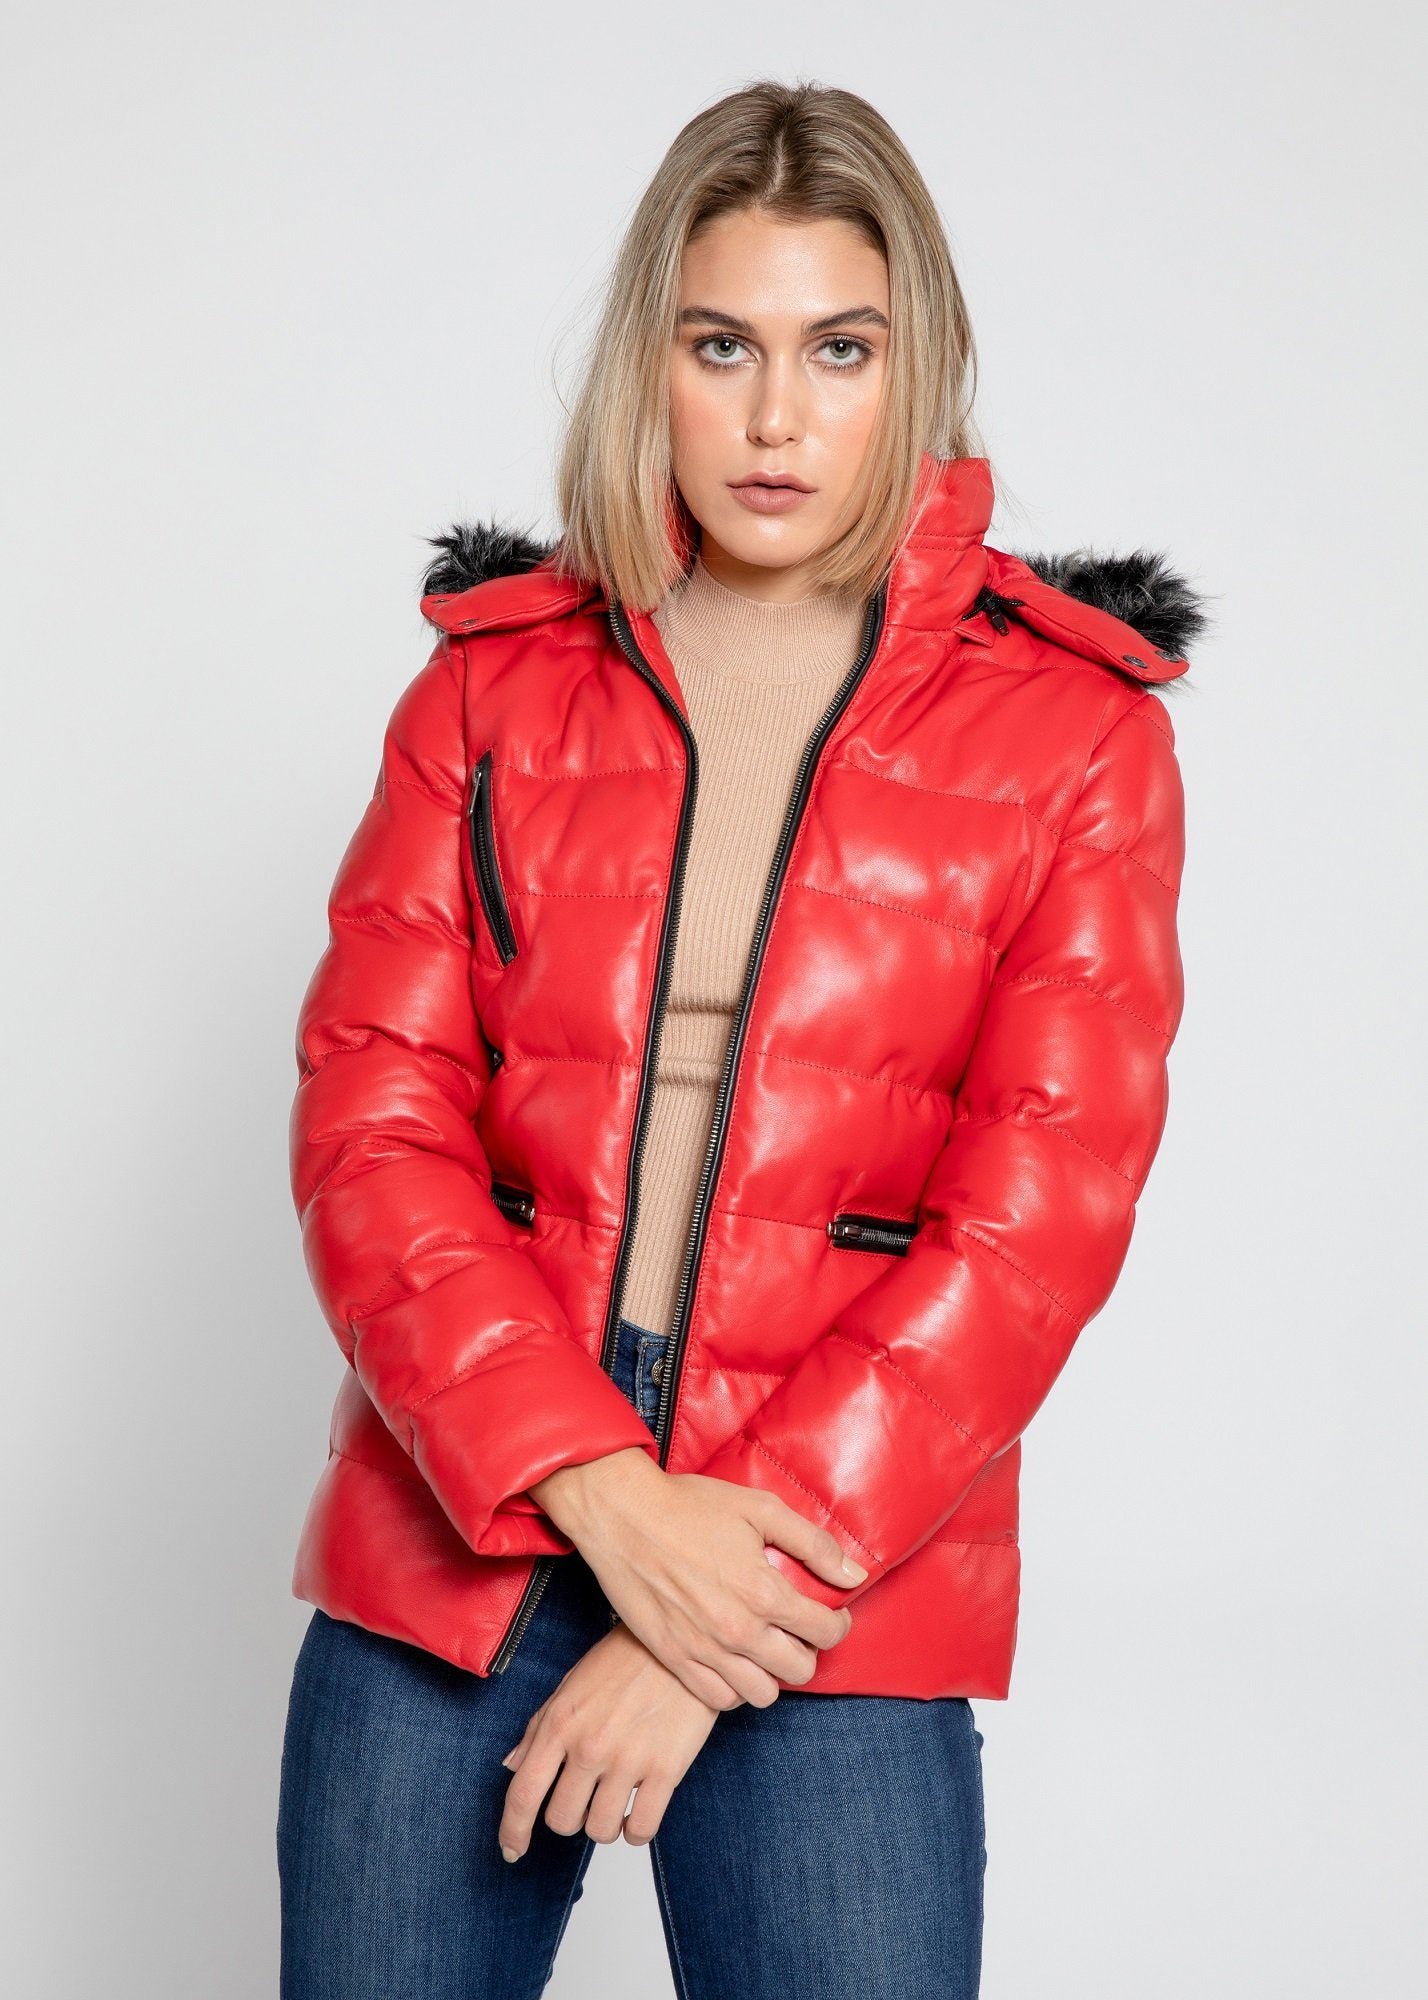 Womens Leather Jacket - Women's Striking Puffer Arctic Red Down Leather ...